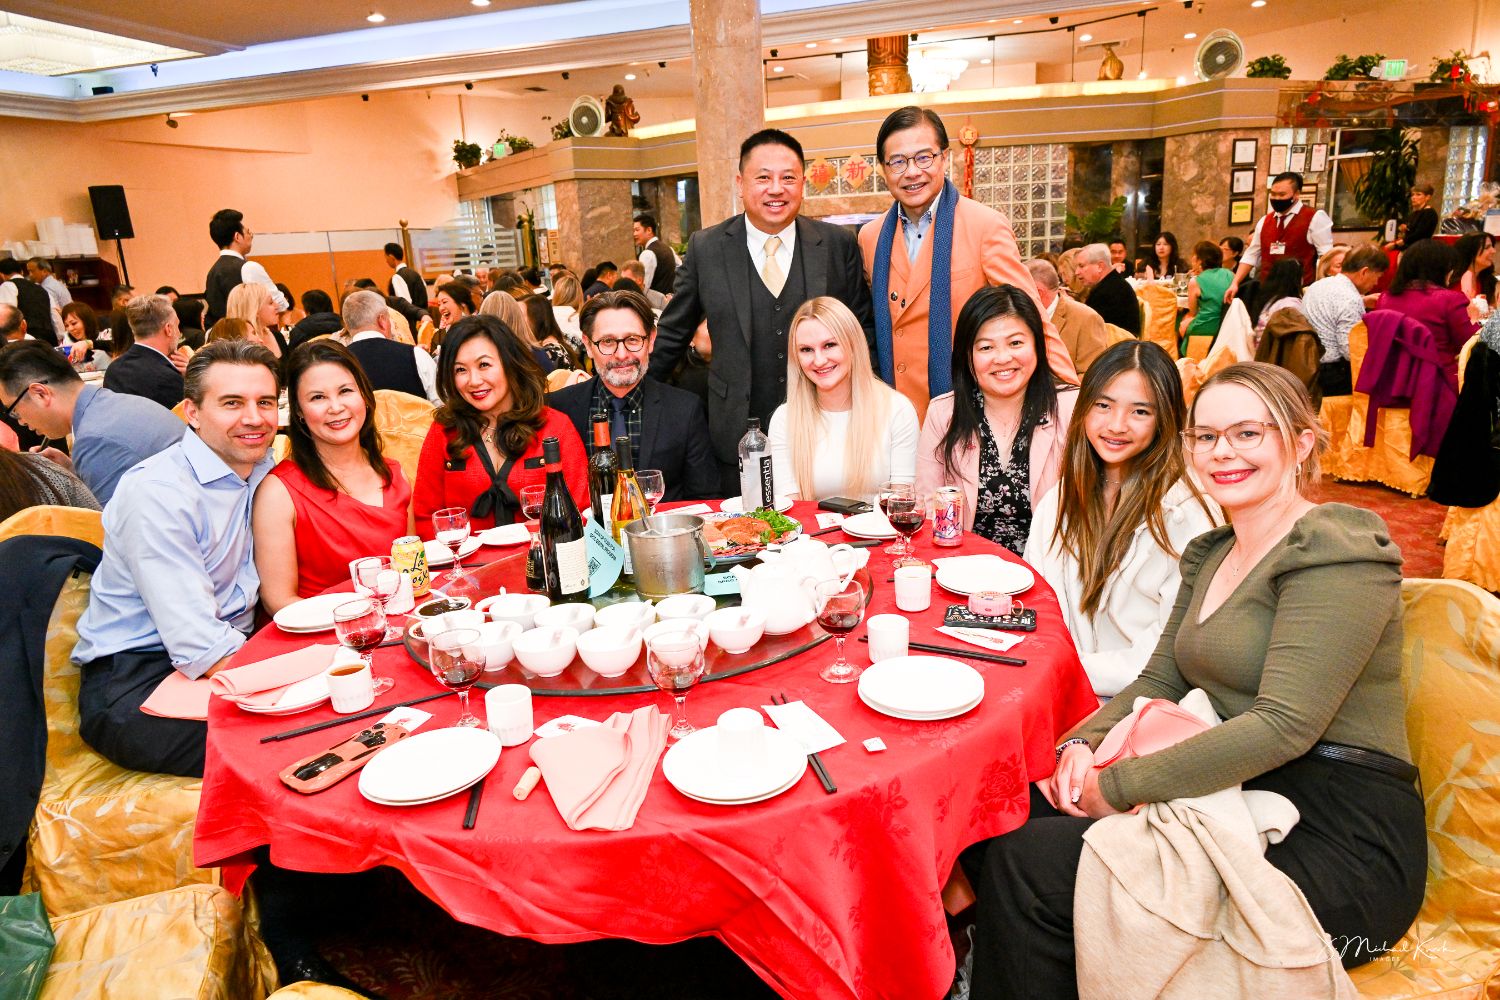 PHOTO: J. Michael Kwok | The South Pasadenan | Some of the guests attending the SPCC annual fundraising gala.